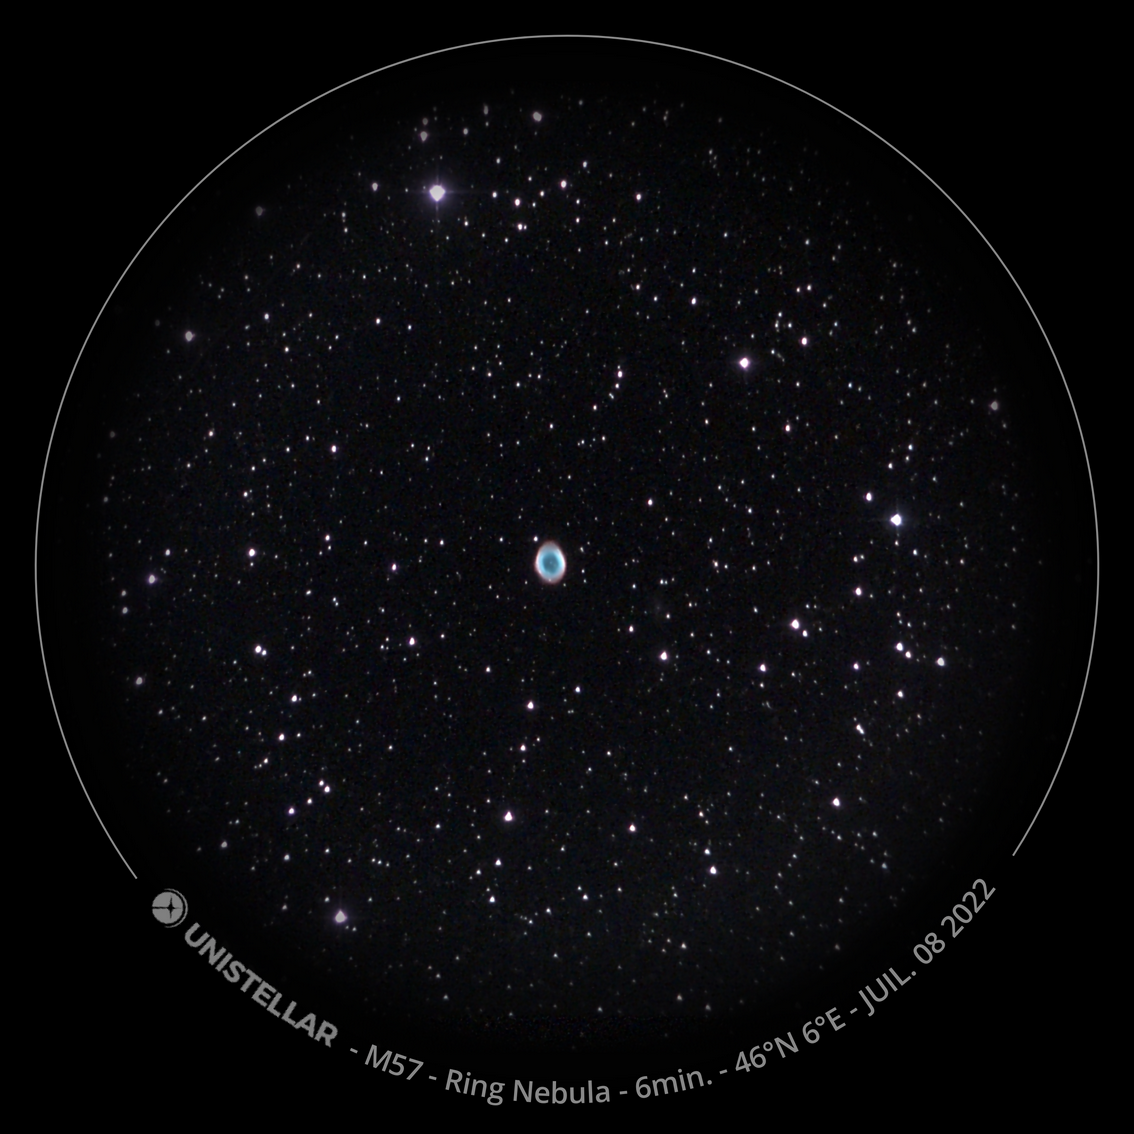 eVscope-20220708-015948.png M57